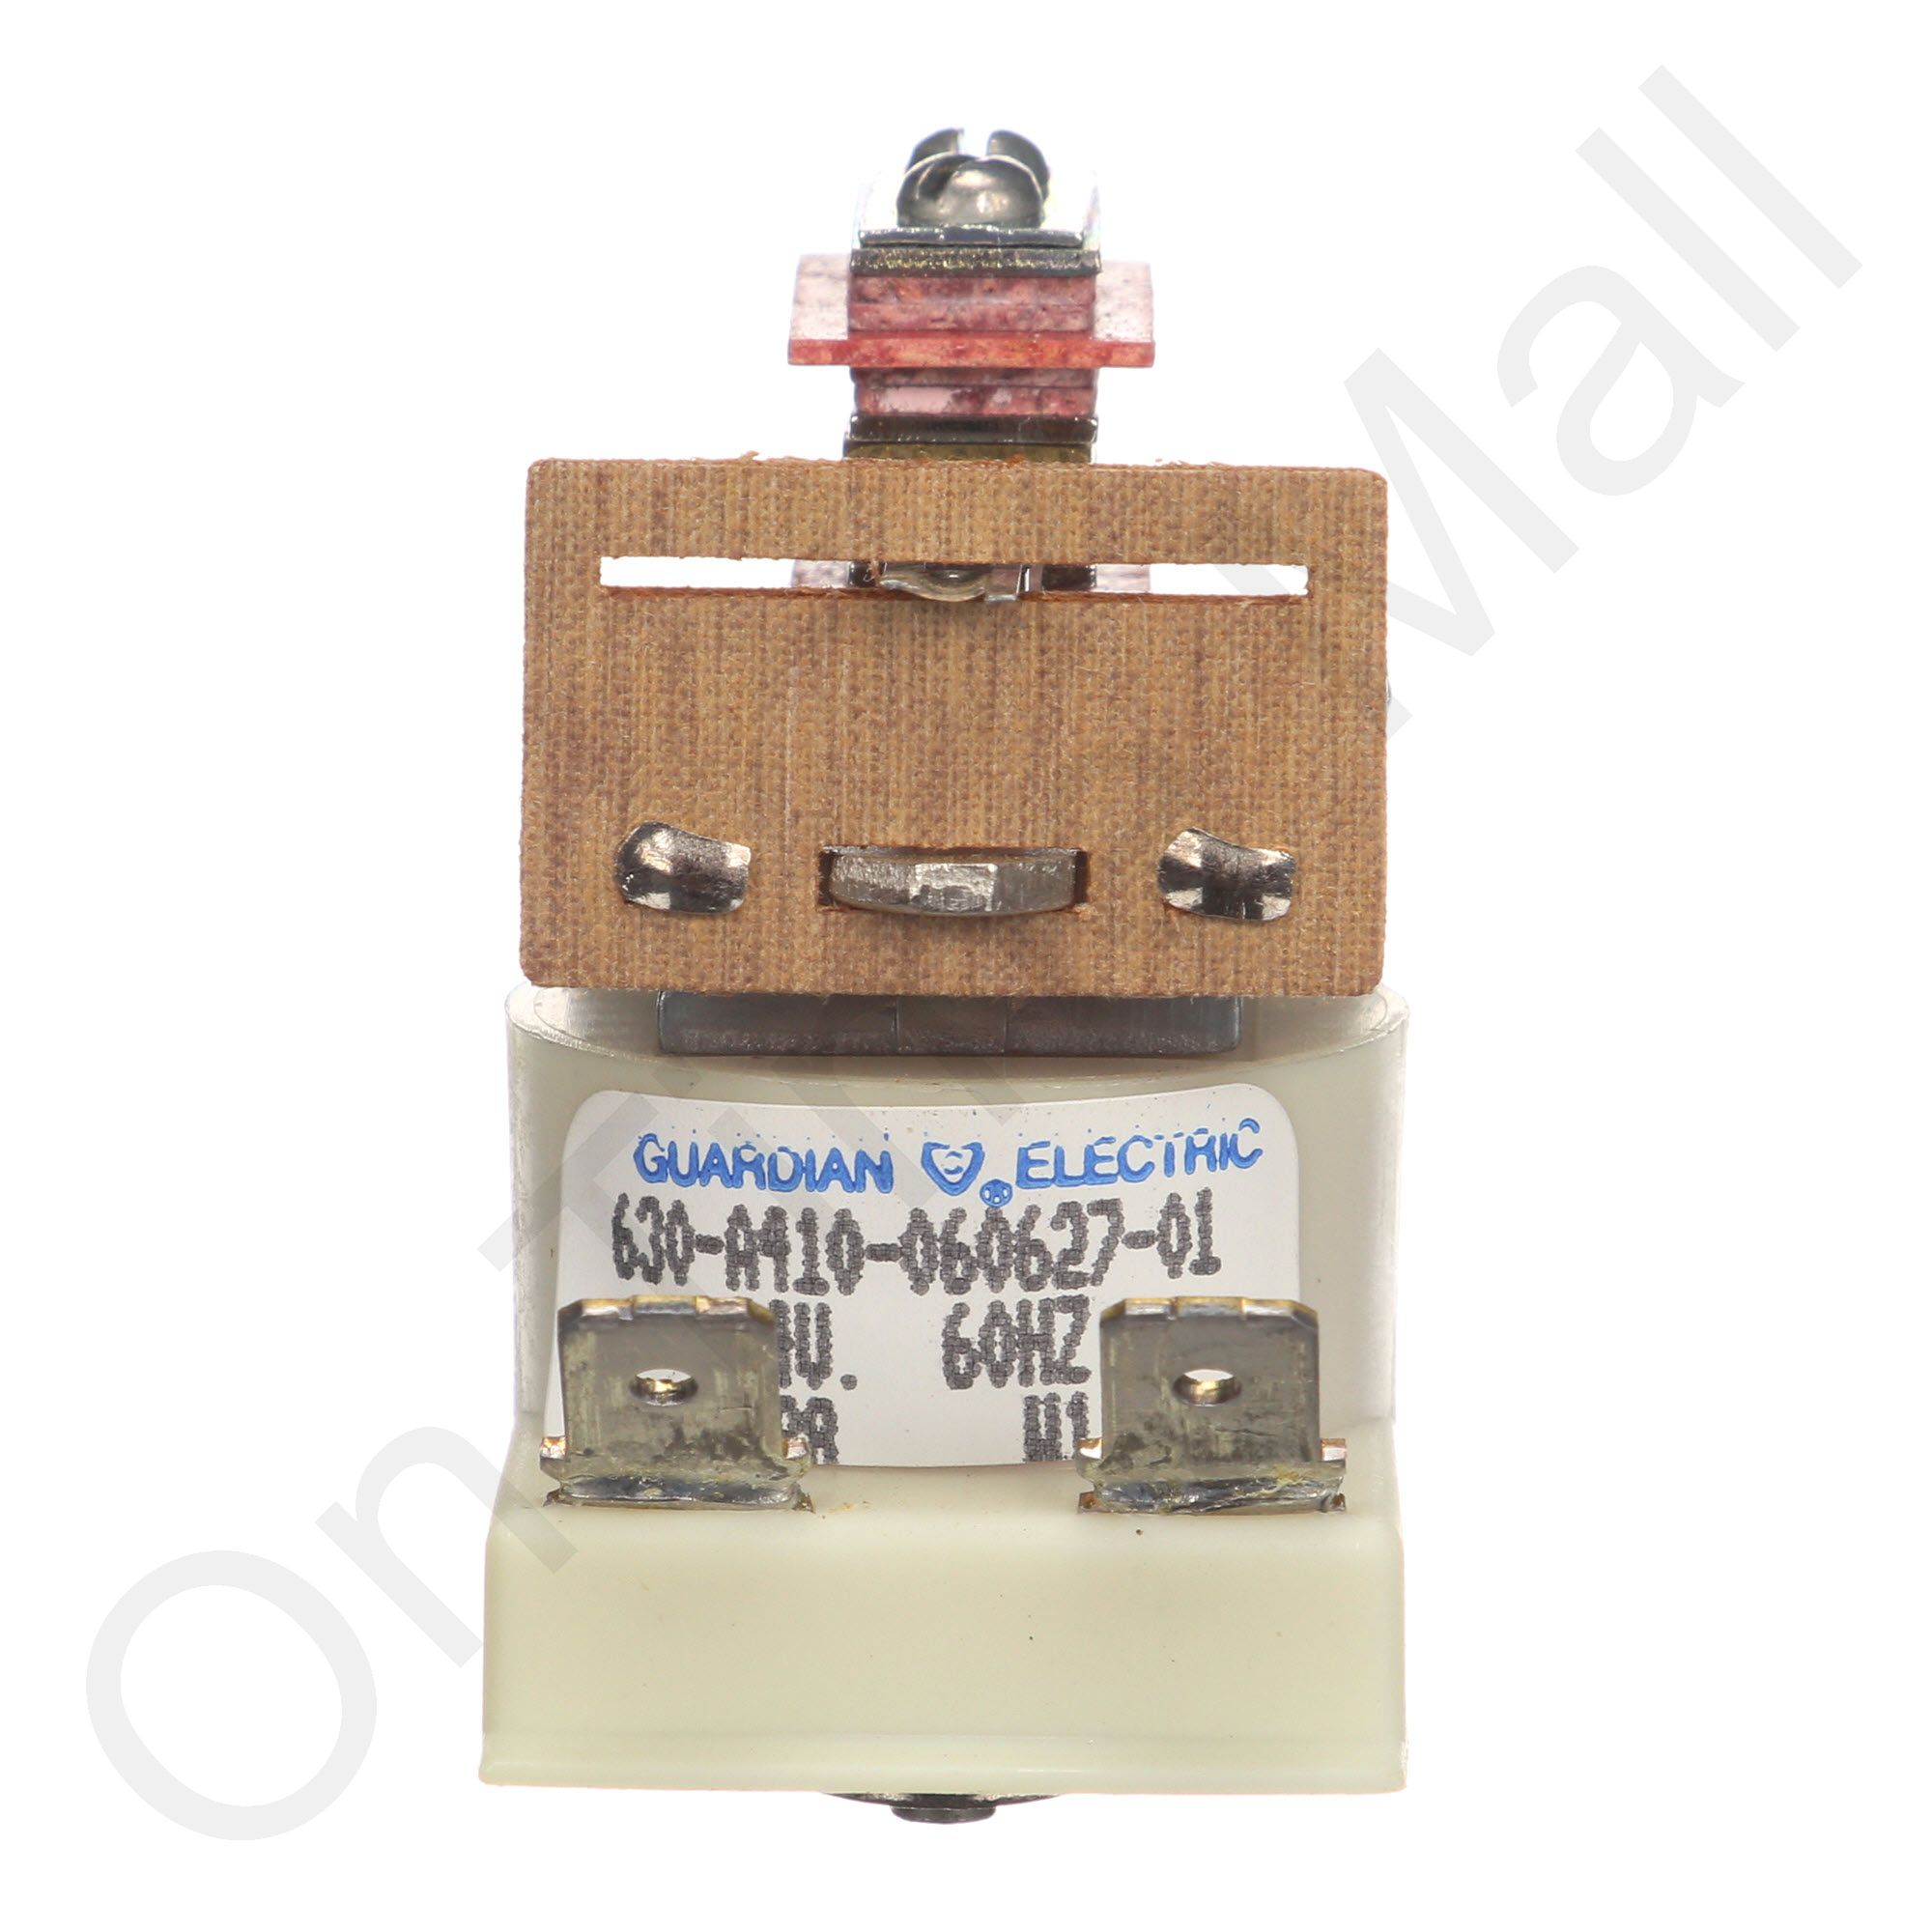 Aprilaire 4012 Humidifier Relay Upgraded for sale online 